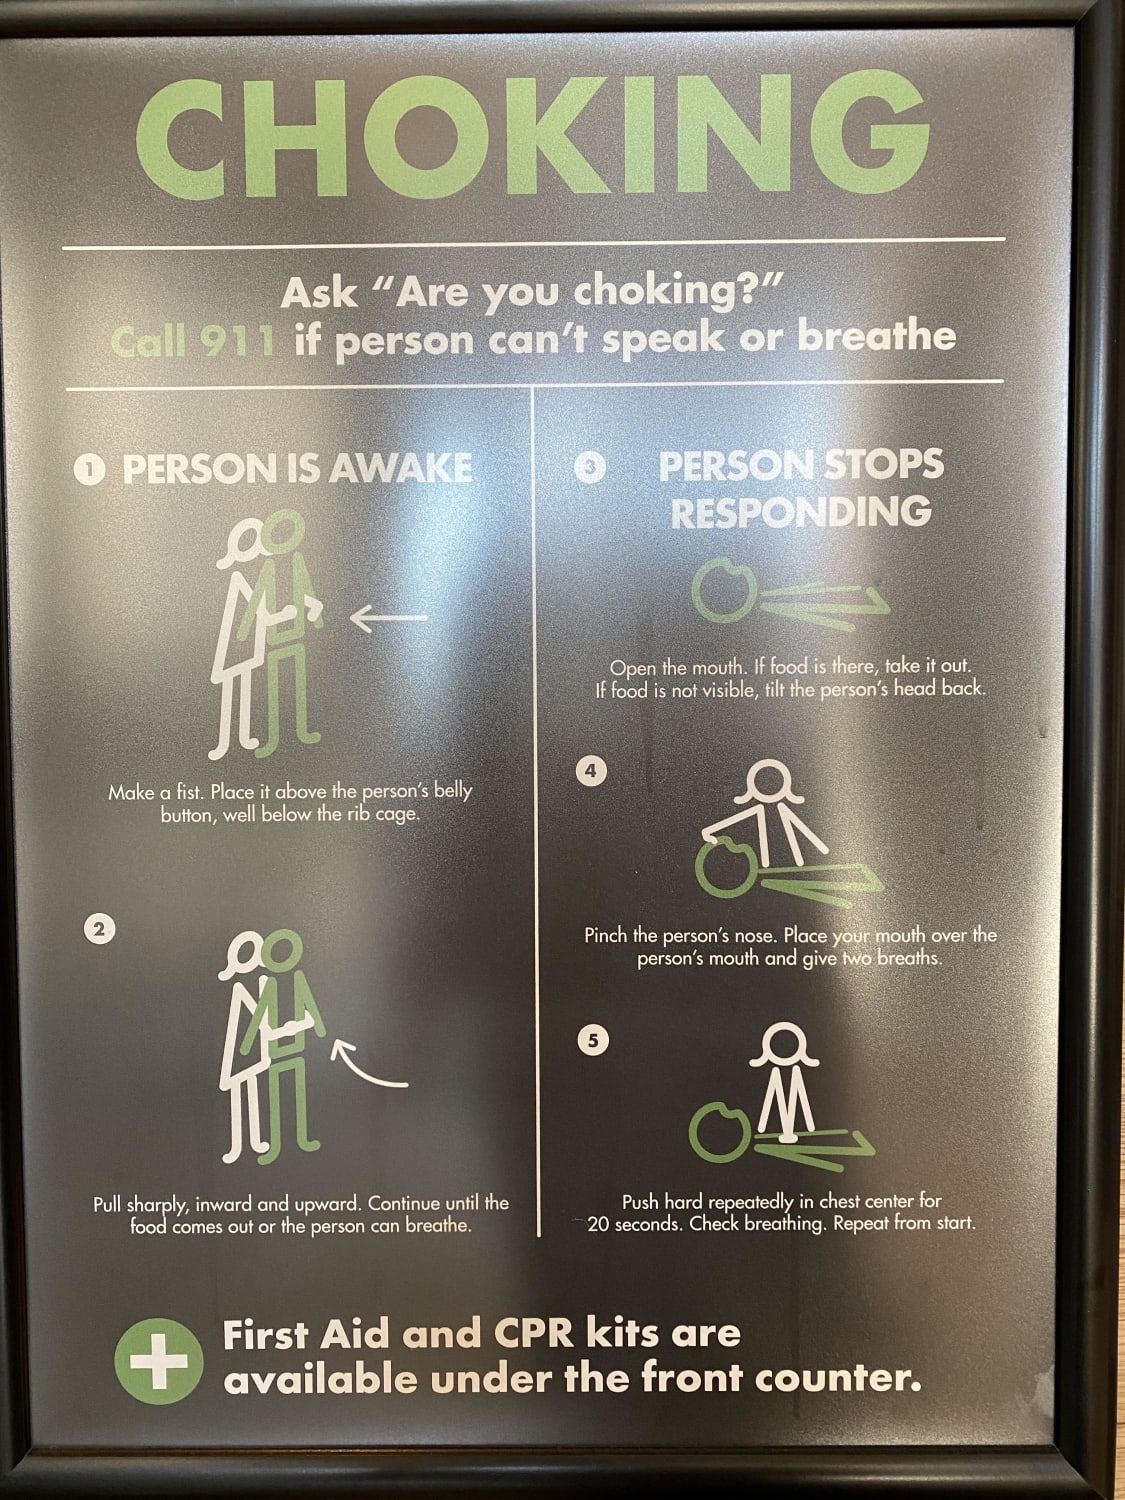 This restaurant has a guide on what to do if you see someone choking